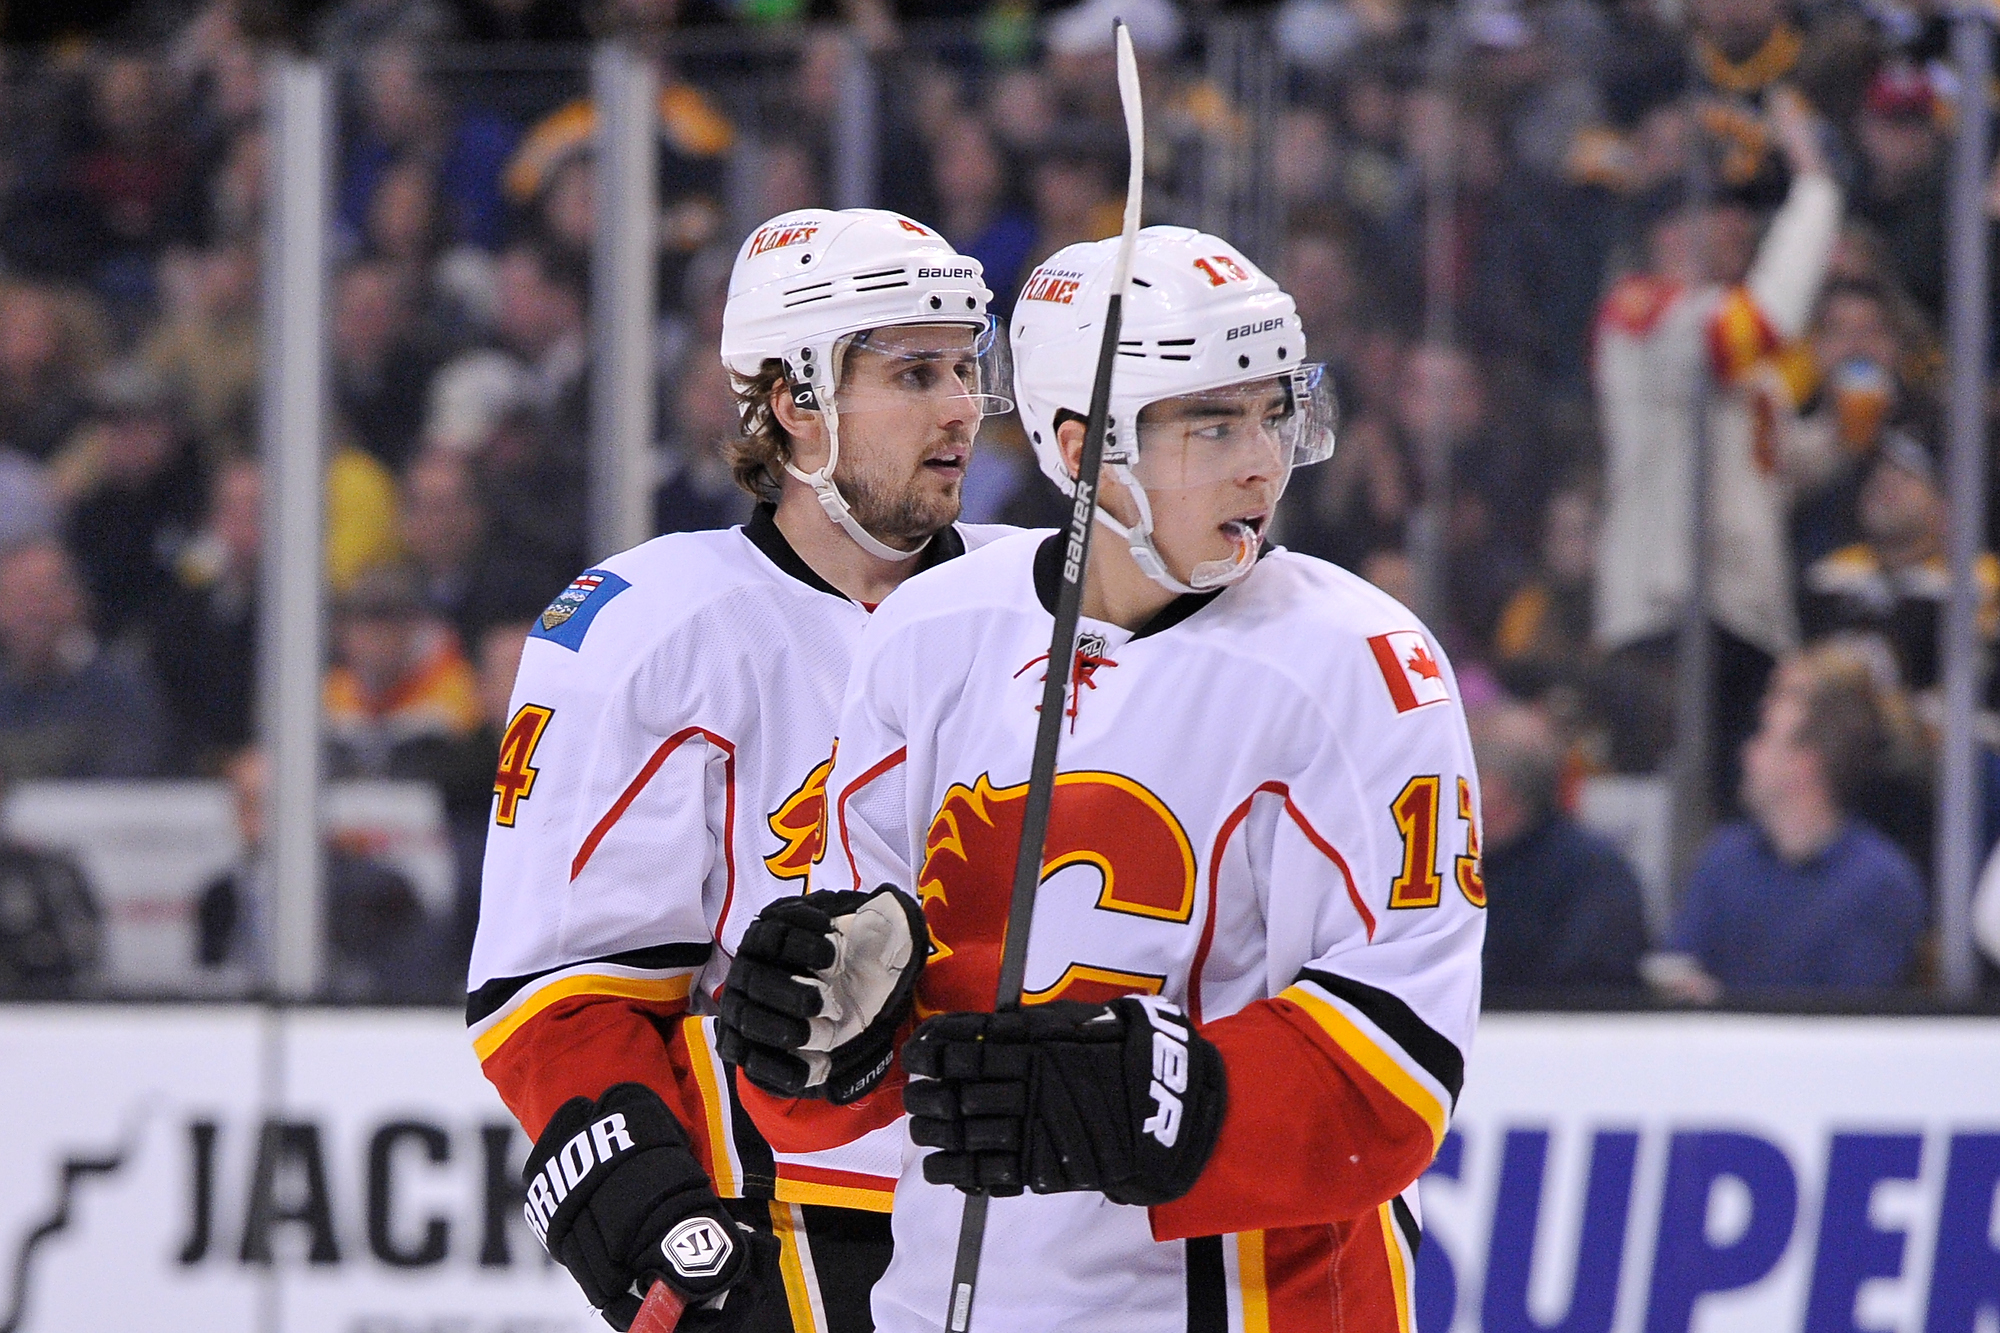 Sharks Lose 3-2 to Flames